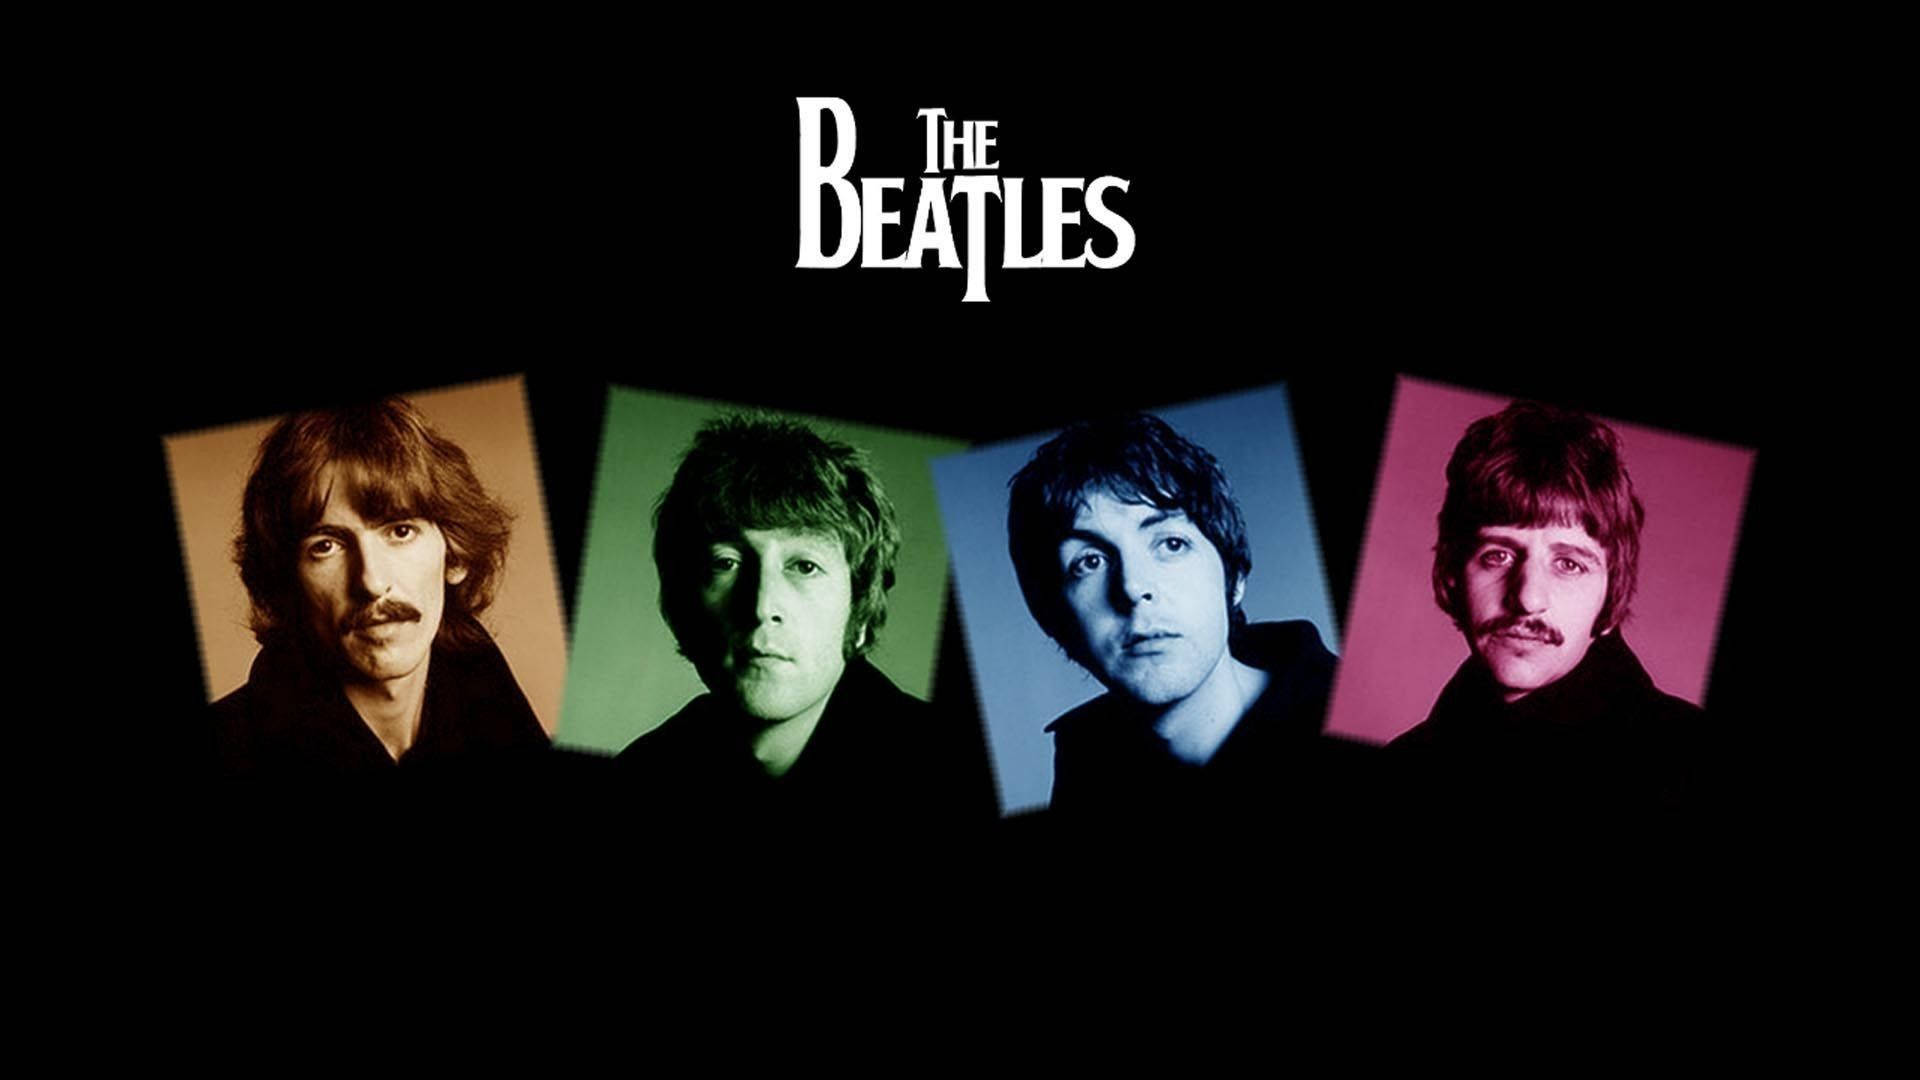 The Beatles Poster Background